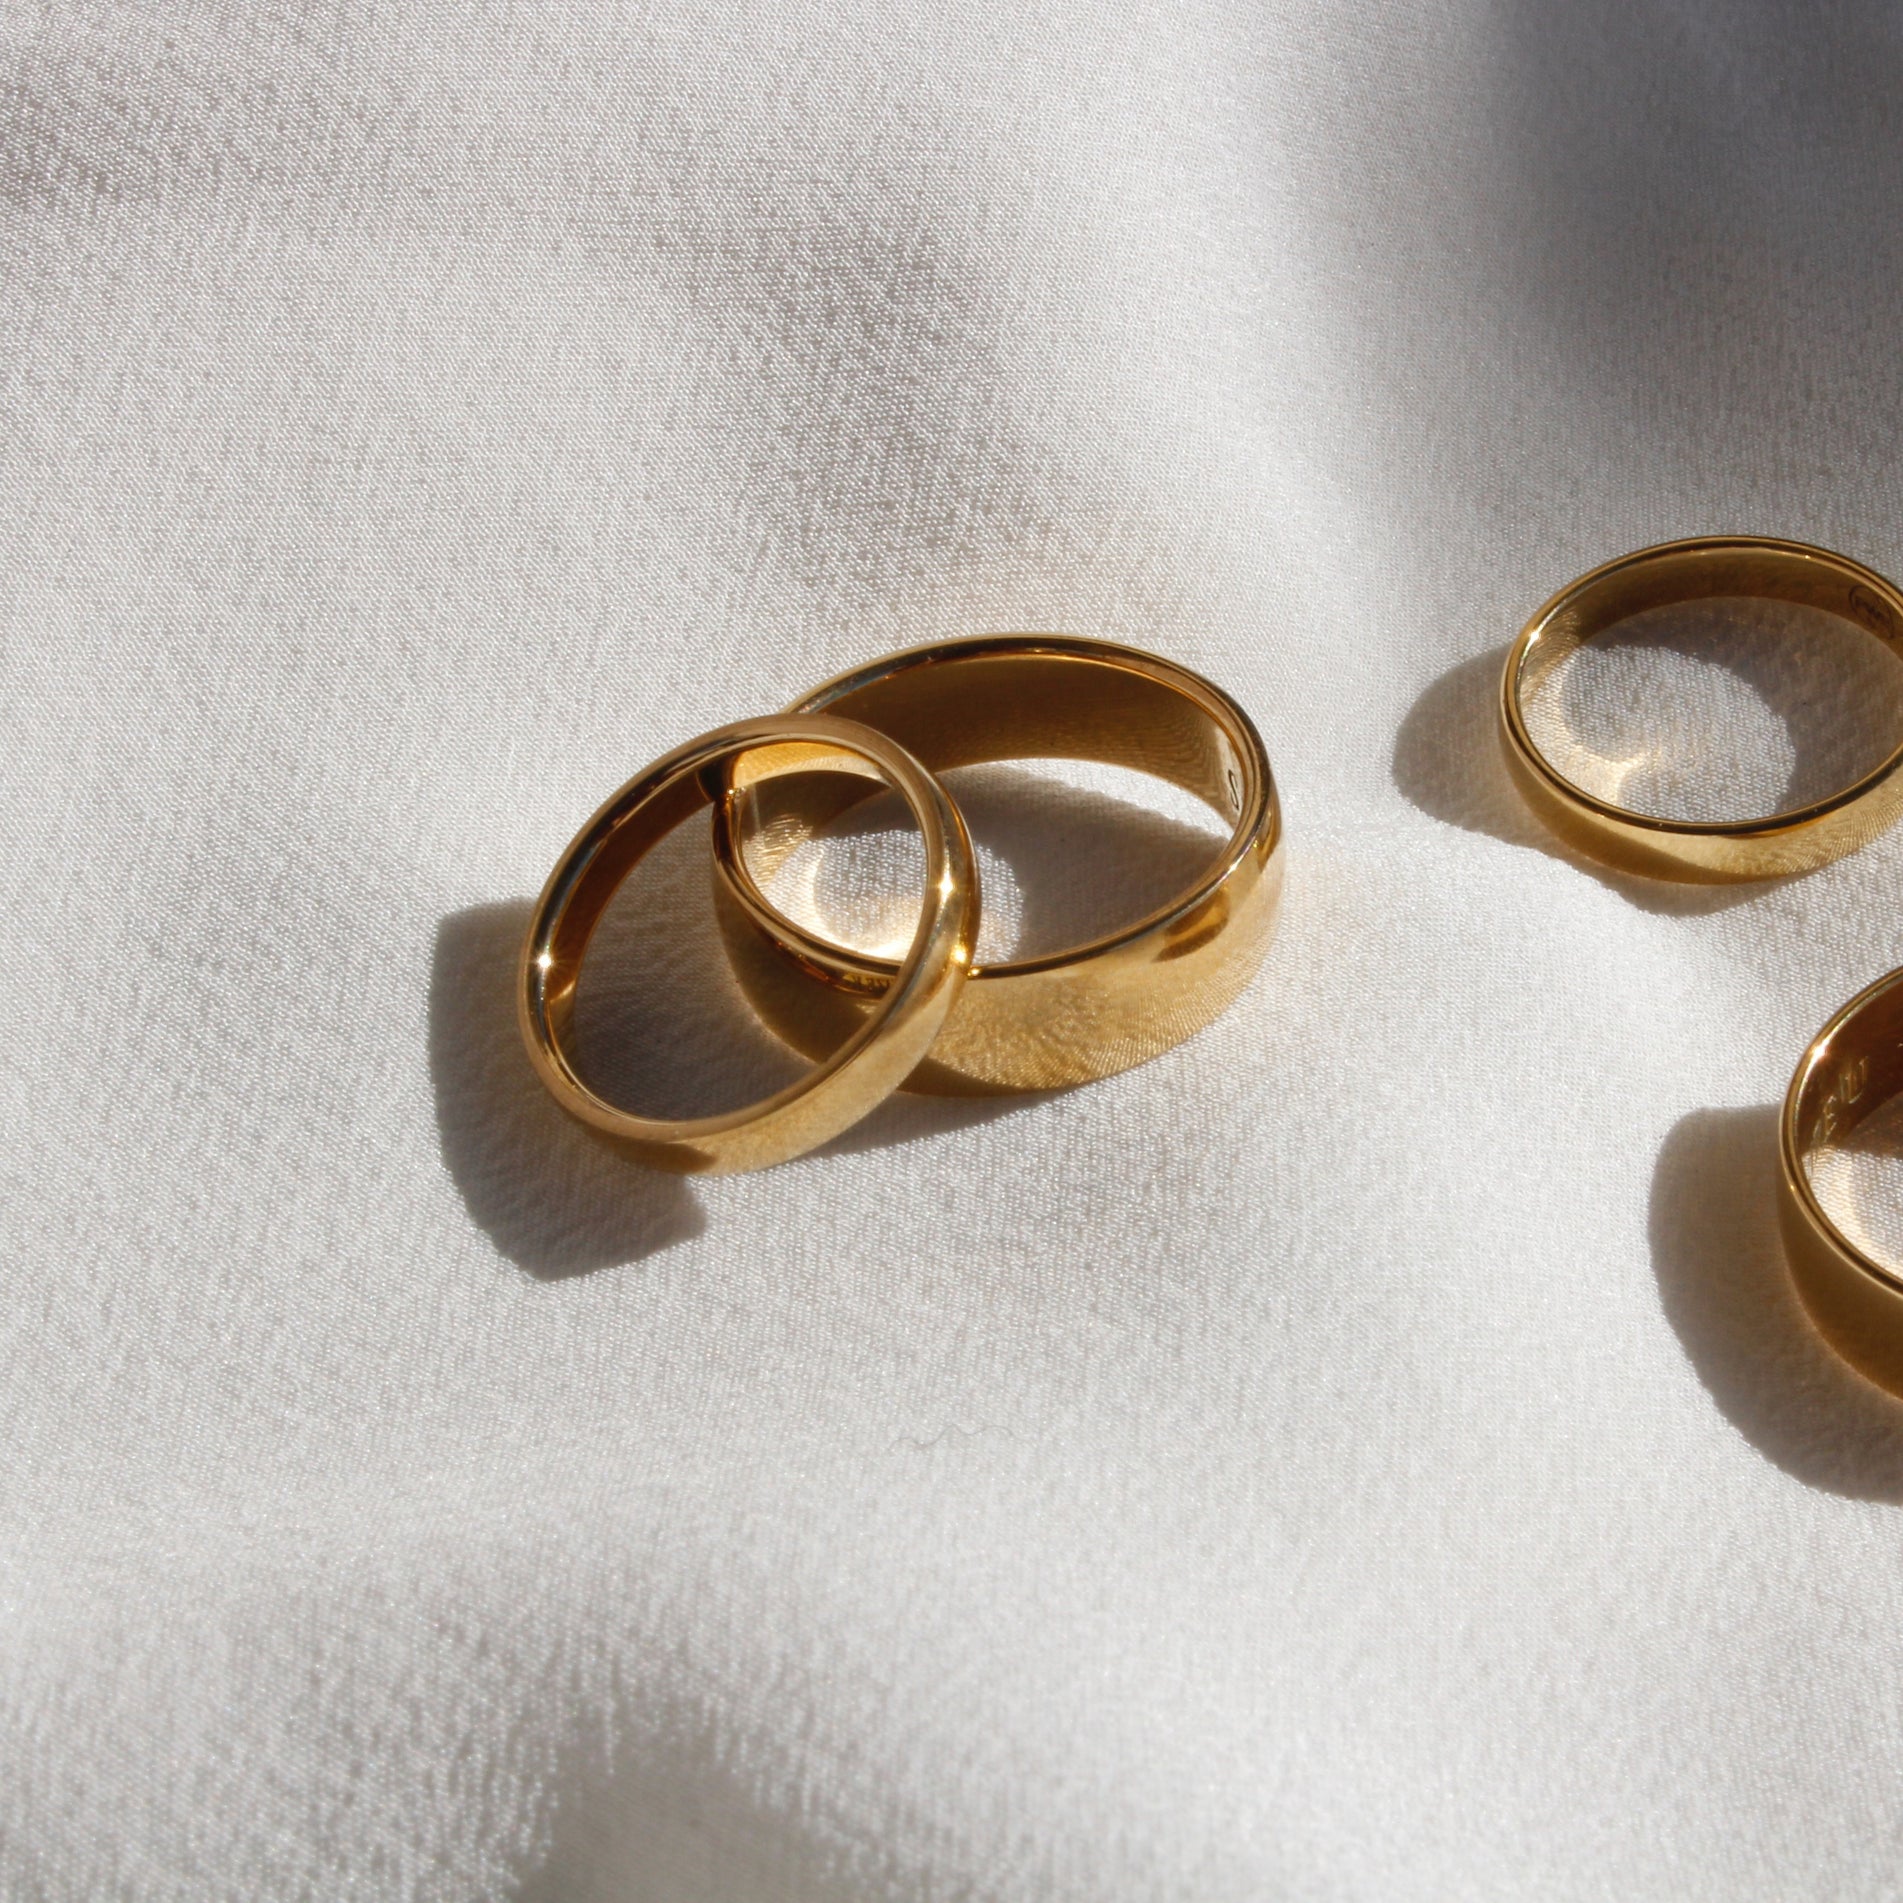 Four Classic Wedding Rings Yellow Gold on a white Fabric